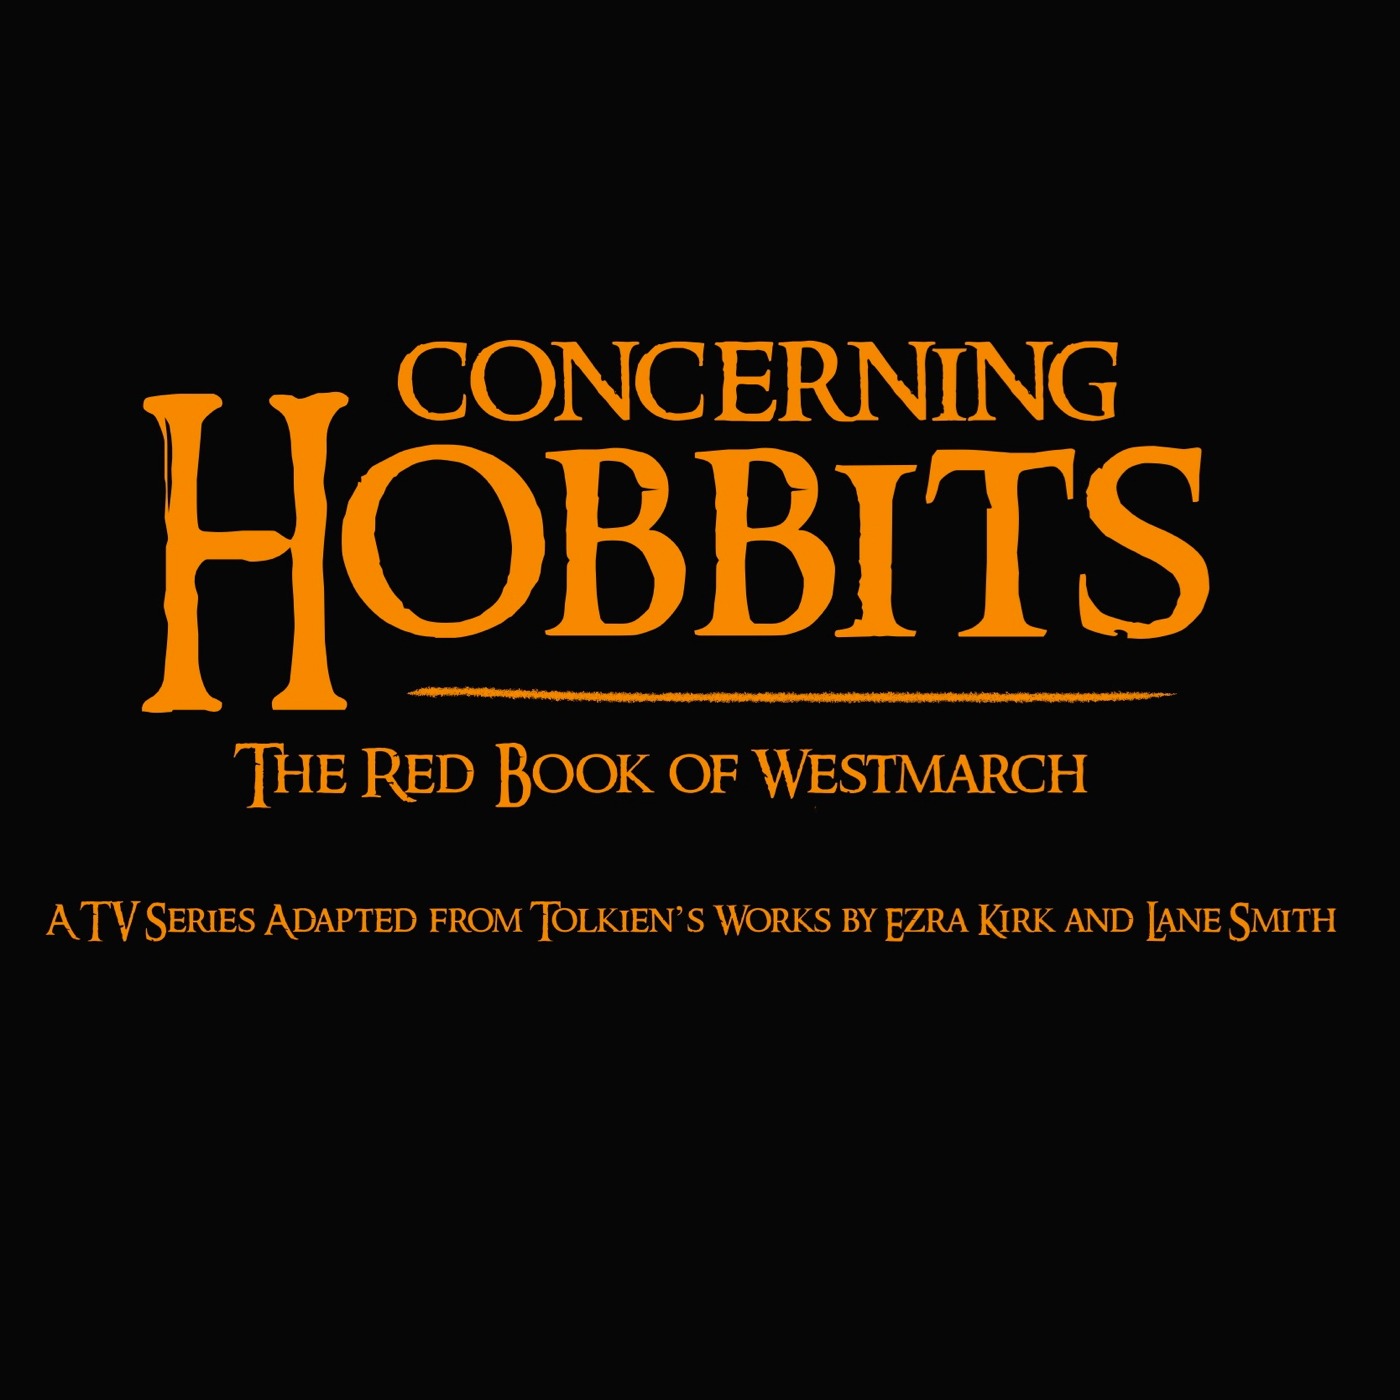 Concerning Hobbits: The Red Book of Westmarch - Season 2: Part 2